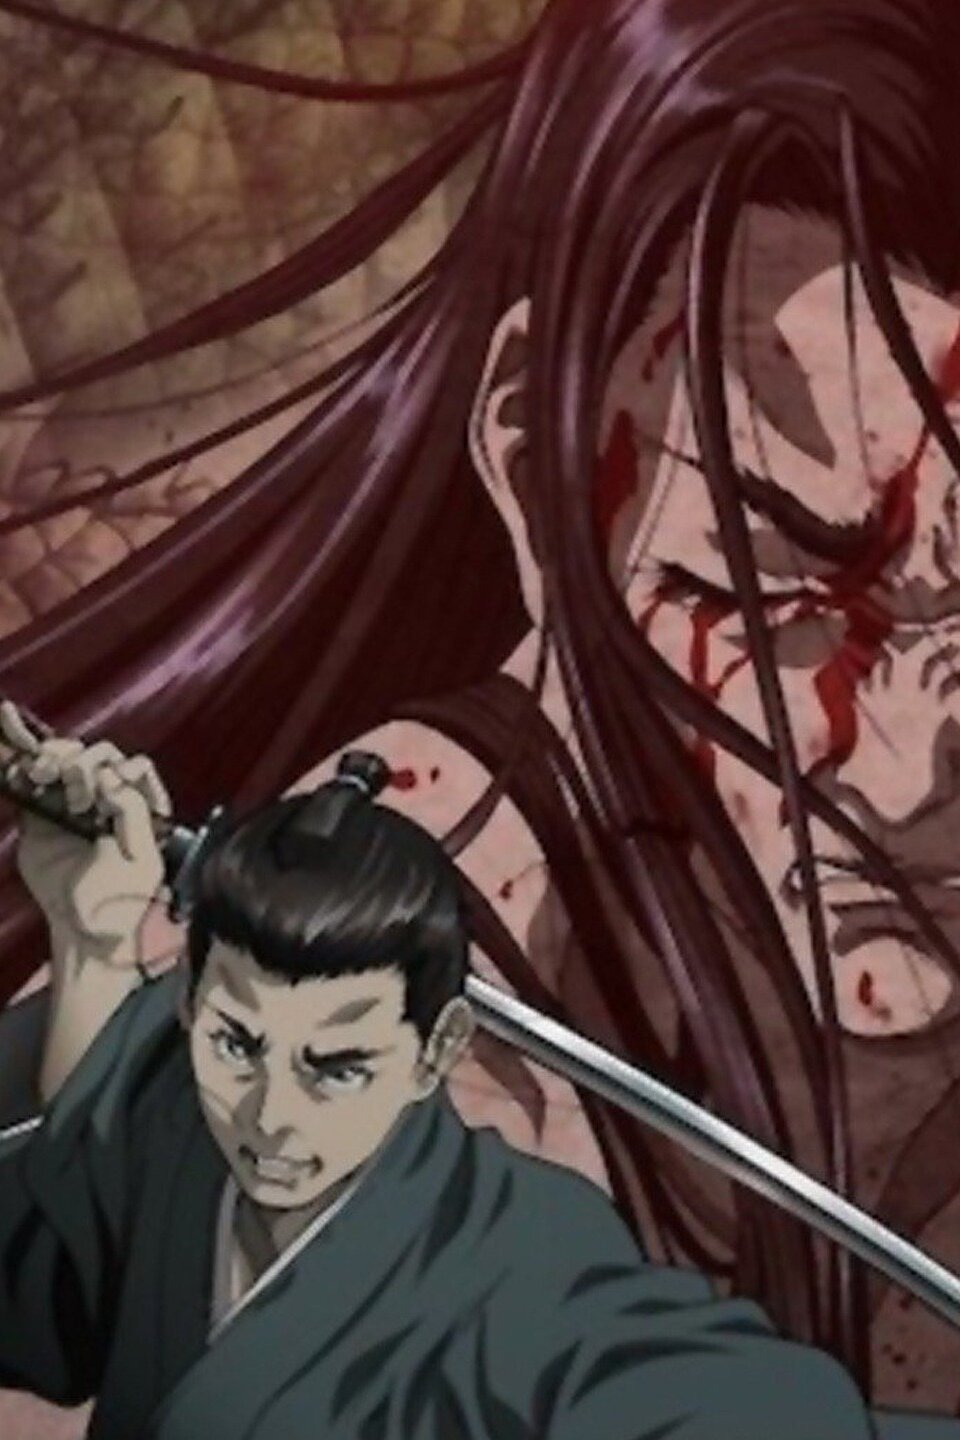 Blades of the Guardians: Check Out Similar Brute Anime - News24